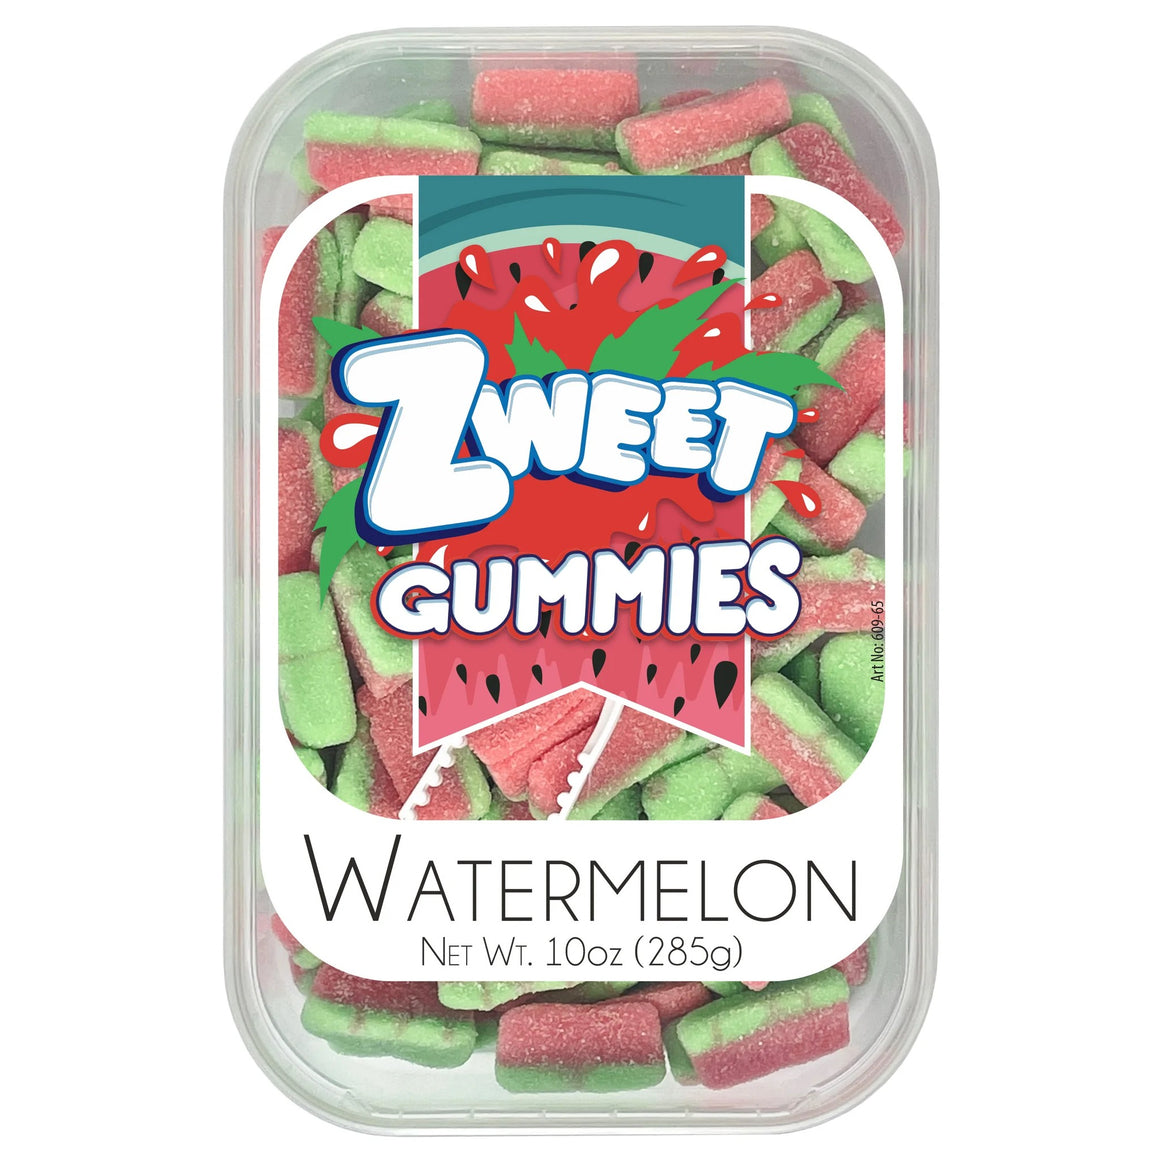 All City Candy Zweet Gummy Sour Watermelon 10 oz. Tub Gummi Galil Foods For fresh candy and great service, visit www.allcitycandy.com